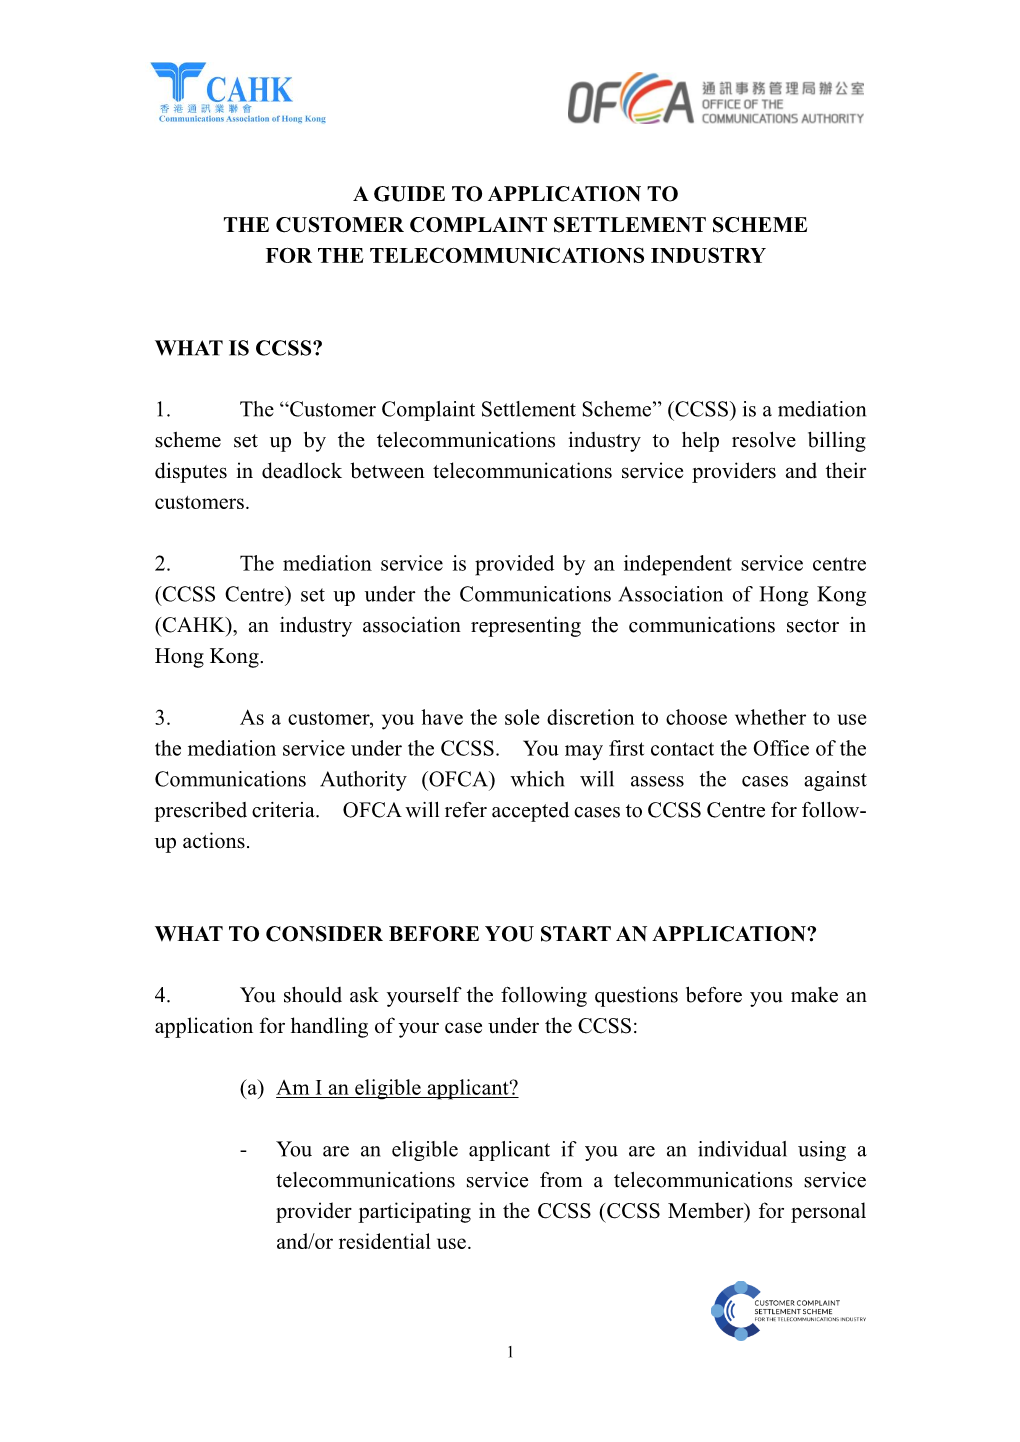 A Guide to Application to the Customer Complaint Settlement Scheme for the Telecommunications Industry